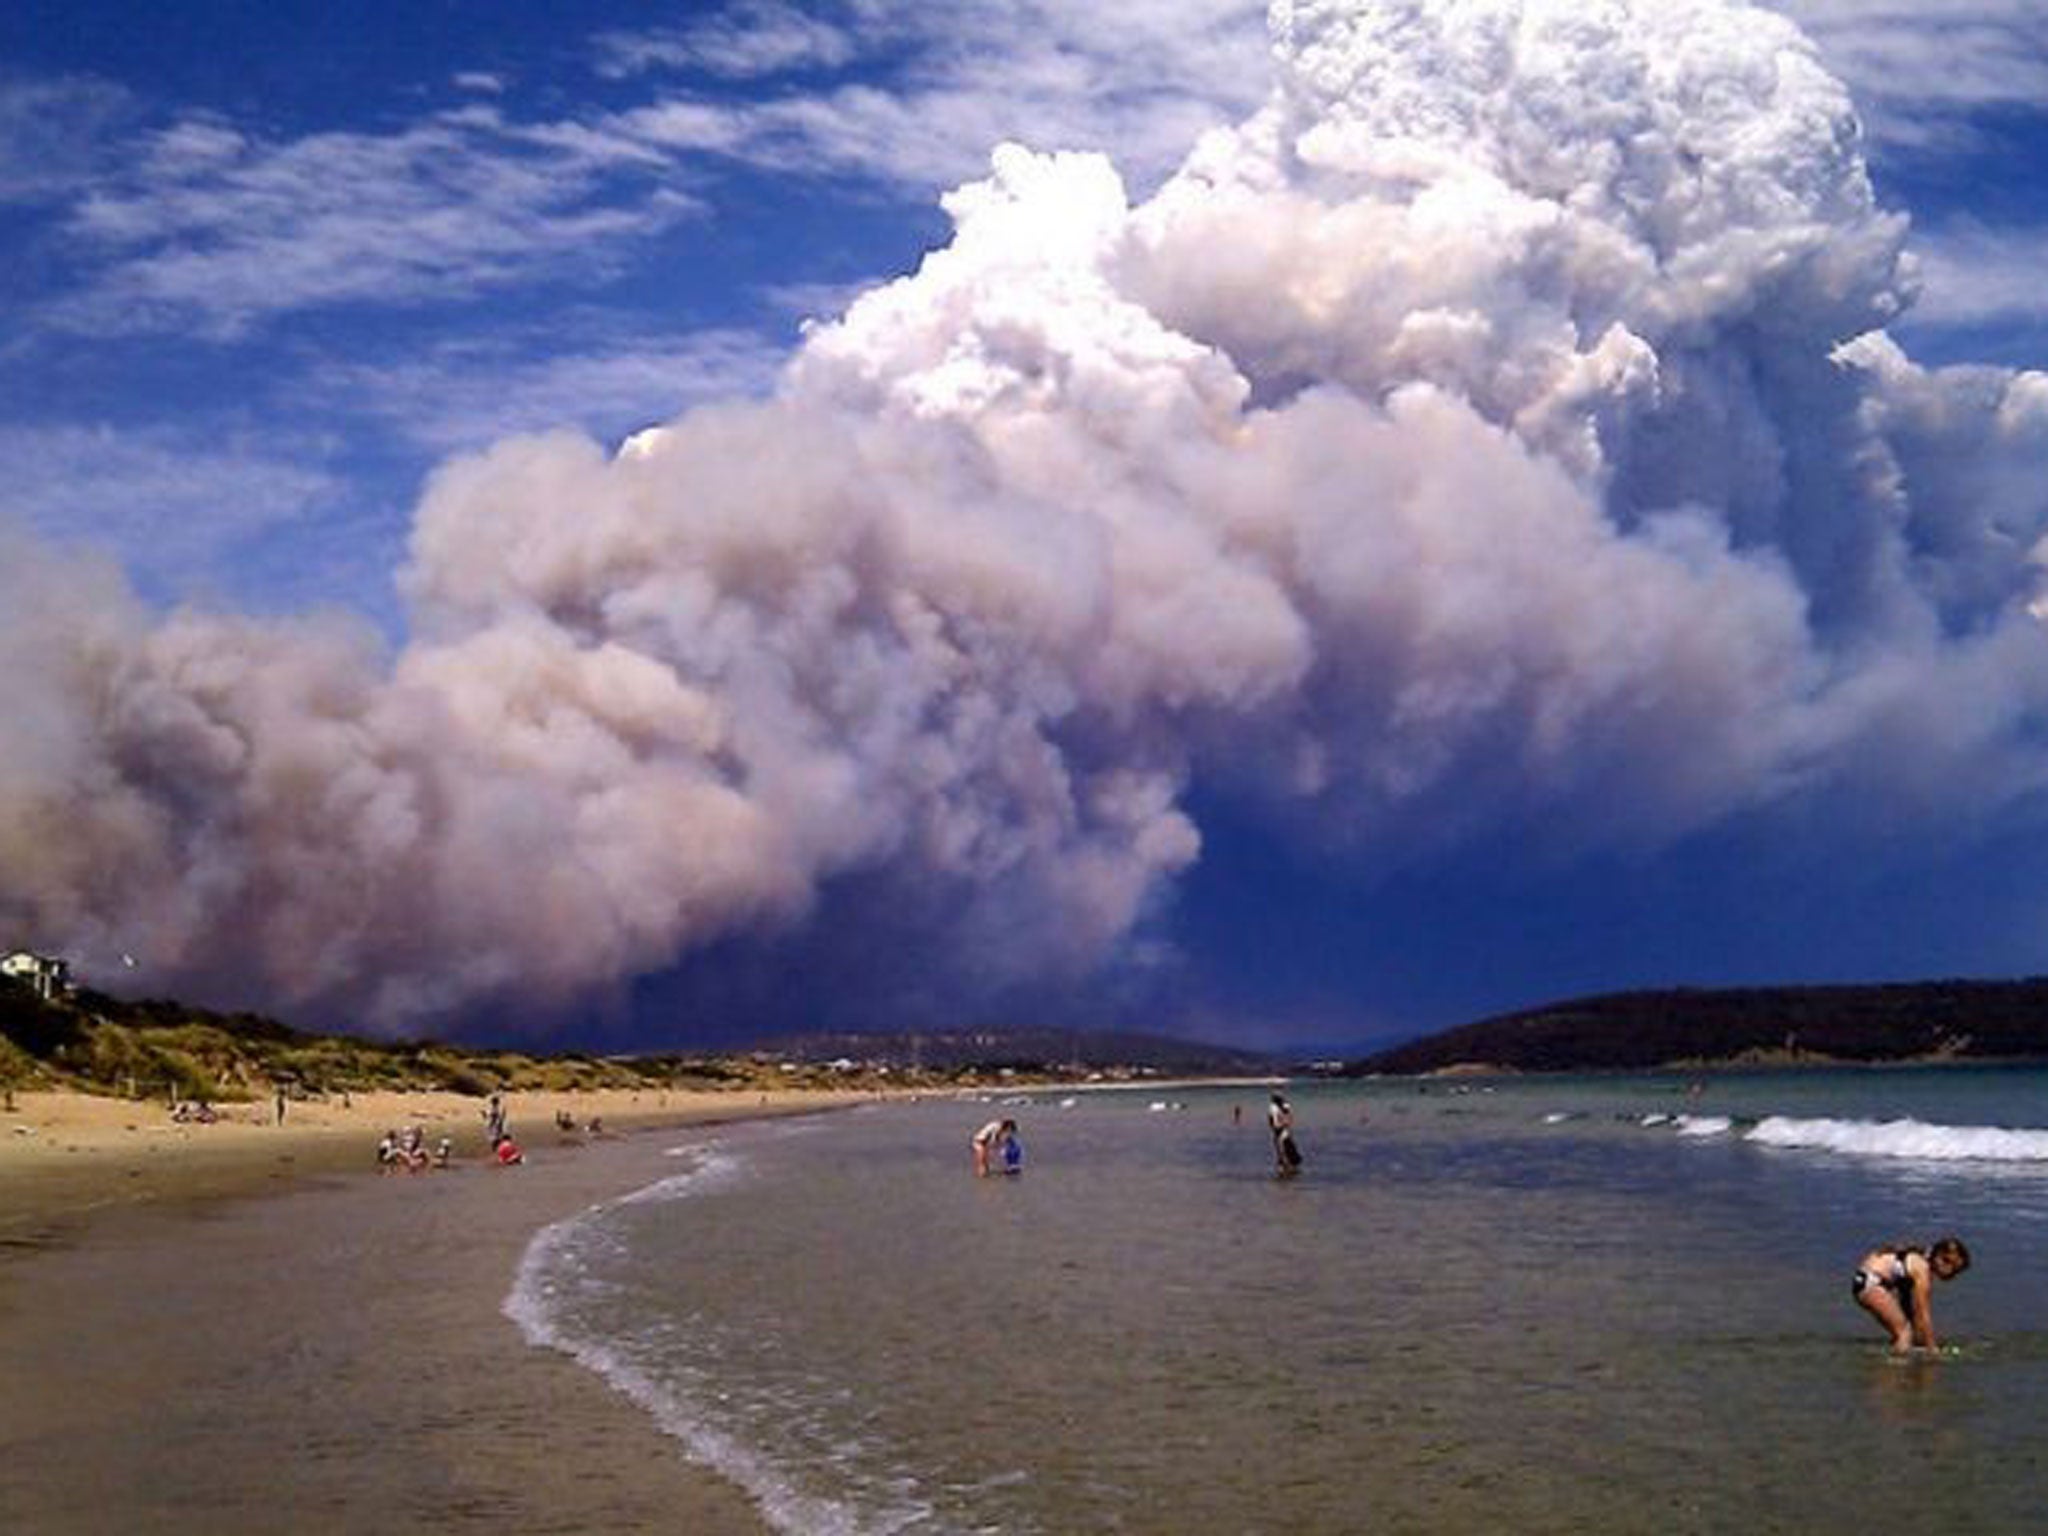 Smoke from a bushfire billows over beach goers at Carlton, about 20 kilometres (12 miles) east of Hobart